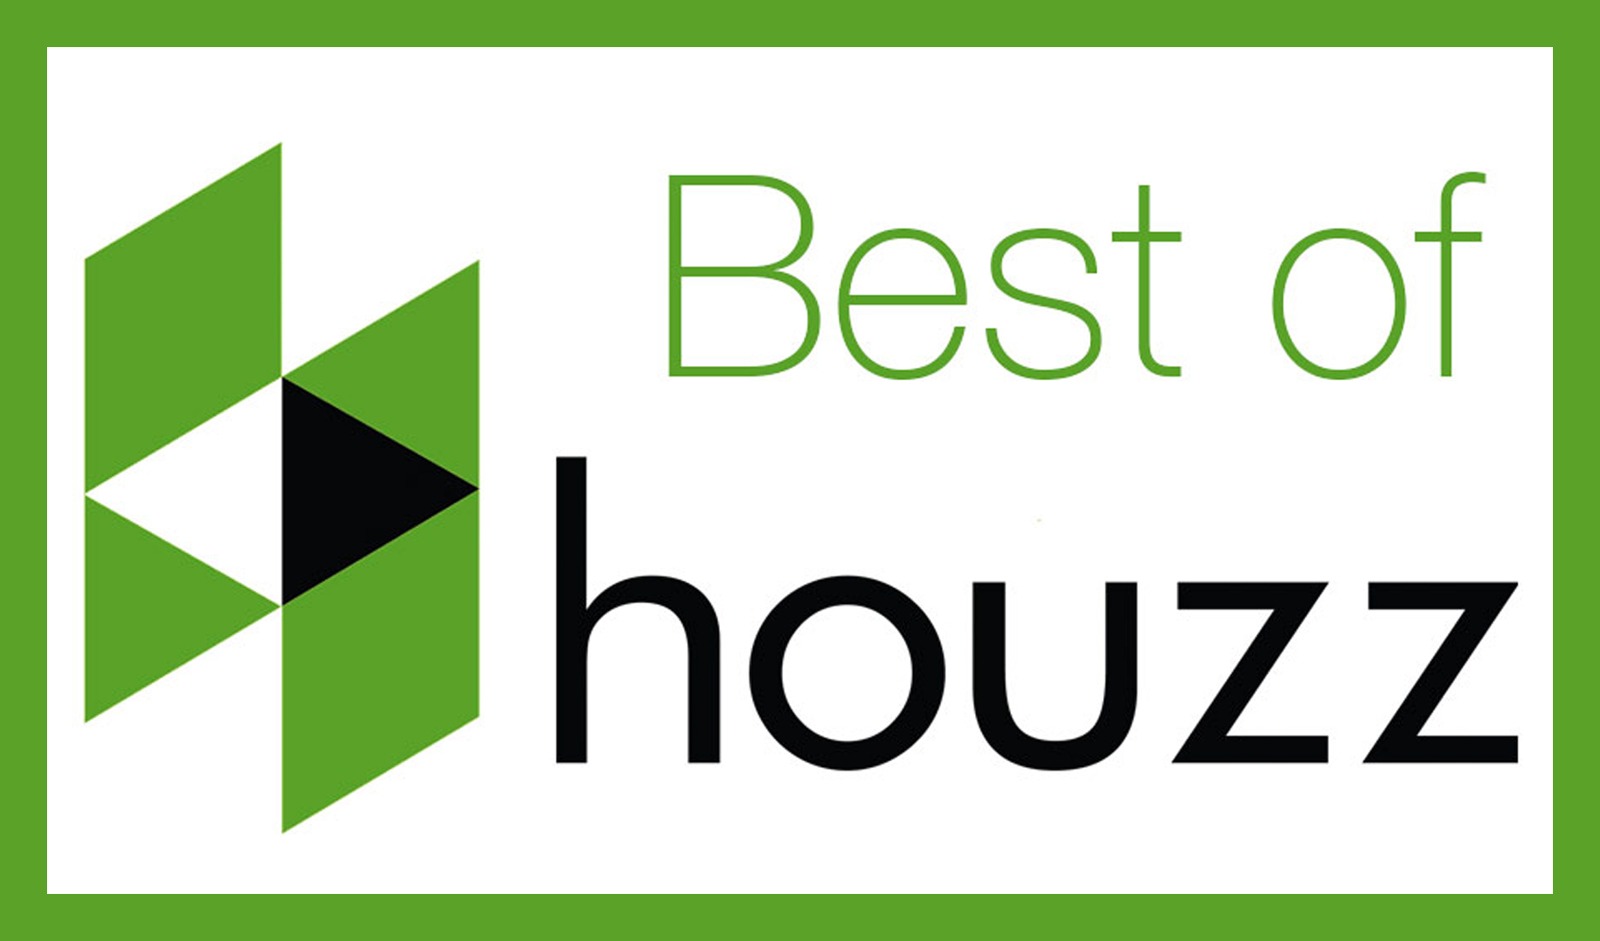 Thanks for helping SawHorse win “Best of Houzz 2020”